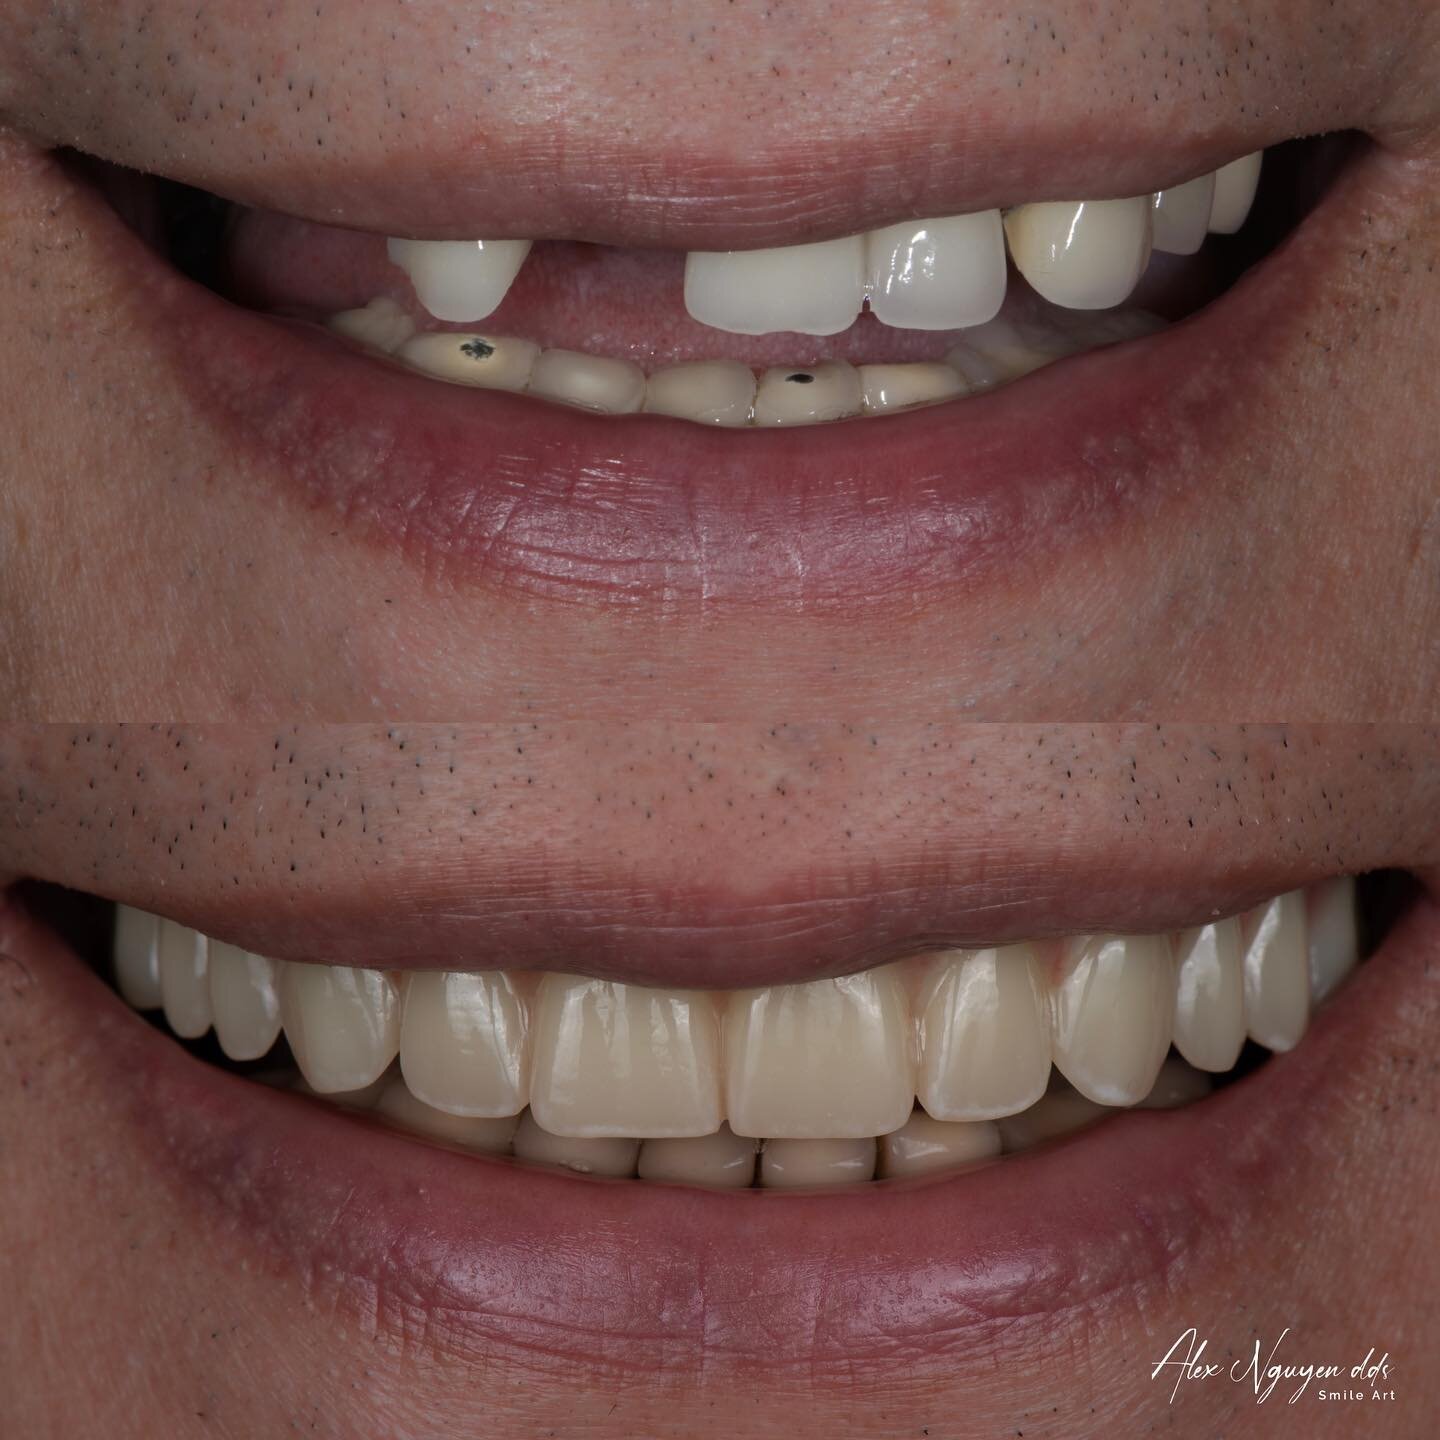 My patient had root canals and crowns done on every single tooth.  The crowns were extremely bright and unnatural.  Over the years his teeth started to break down one by one.

Using 5 implants to support a full arch zirconia prosthesis, I was able to